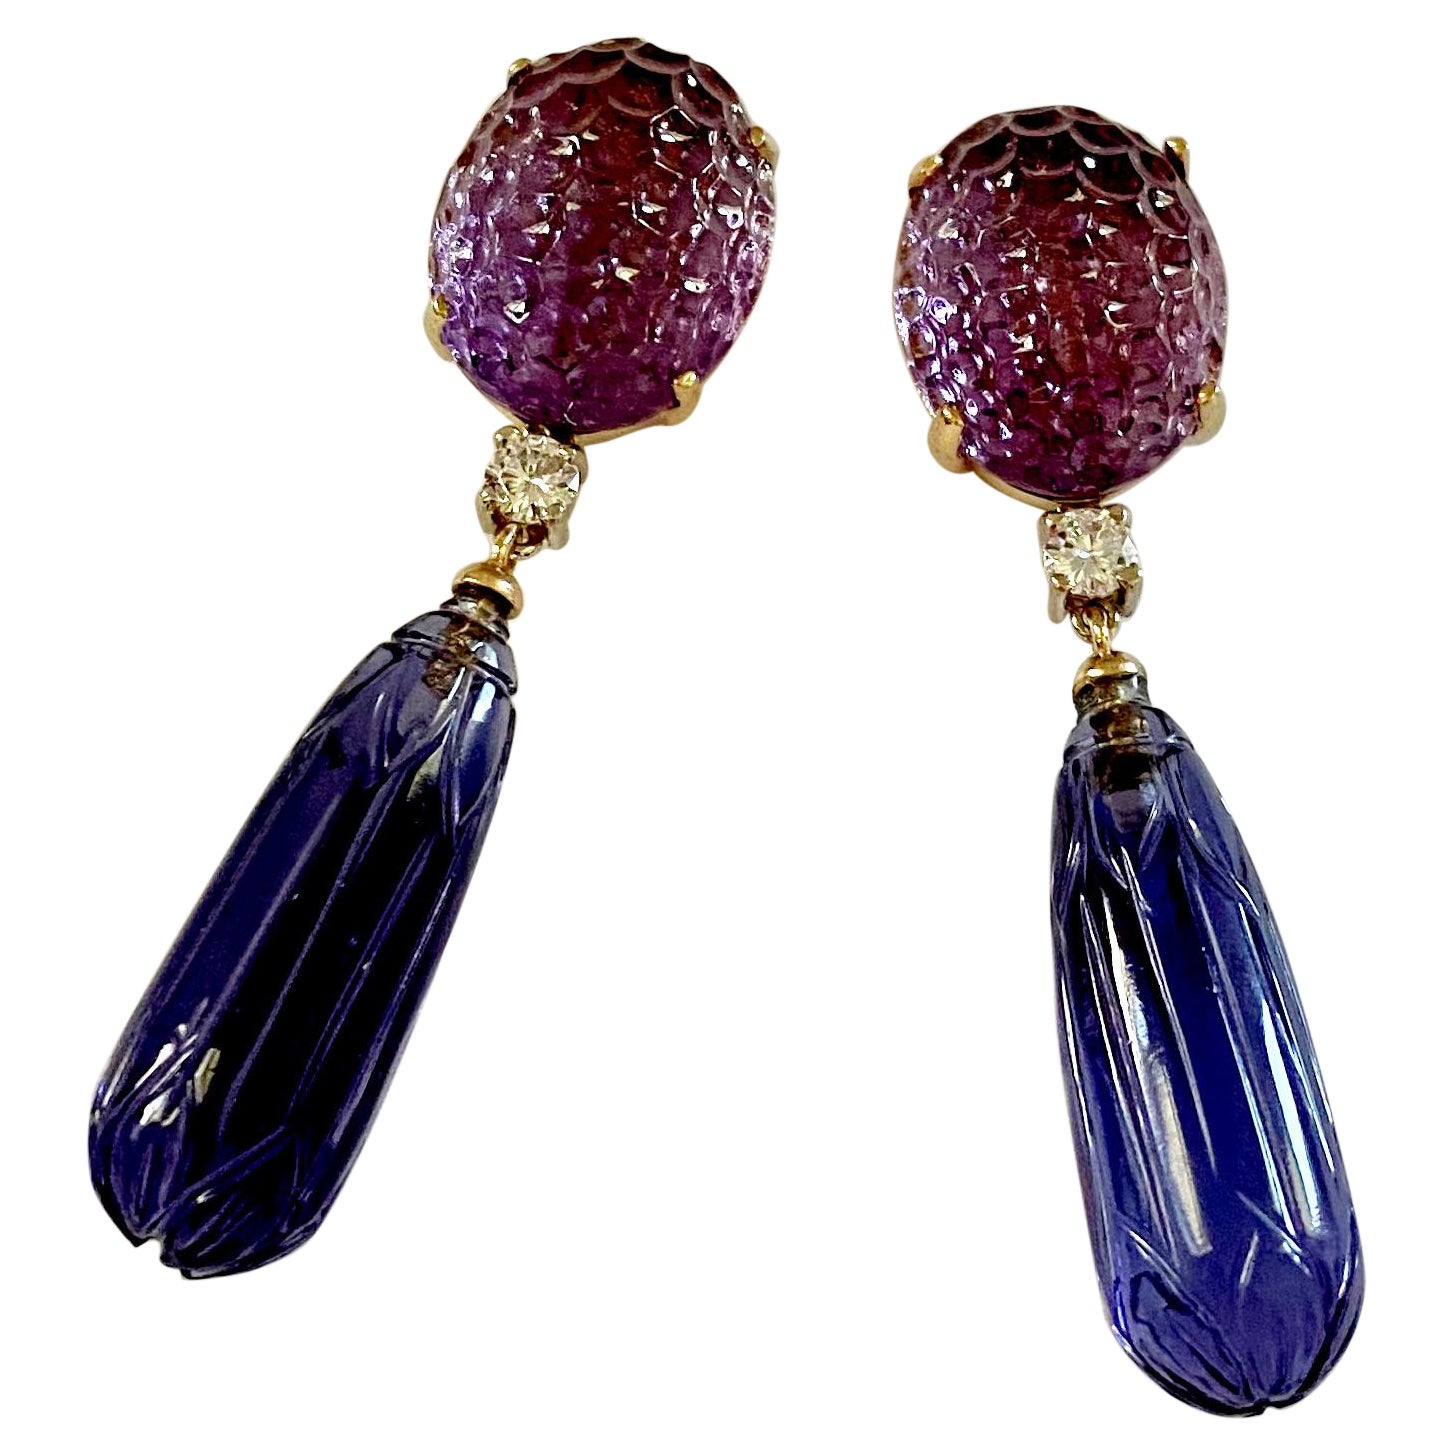 Purple amethyst (origin: Brazil) is paired with blue kyanite (origin: Tanzania) in these elegant dangle earrings.  The medium purple colored amethyst are carved in a honeycomb pattern.  The elongated kyanite drops are carved in a floral design. 